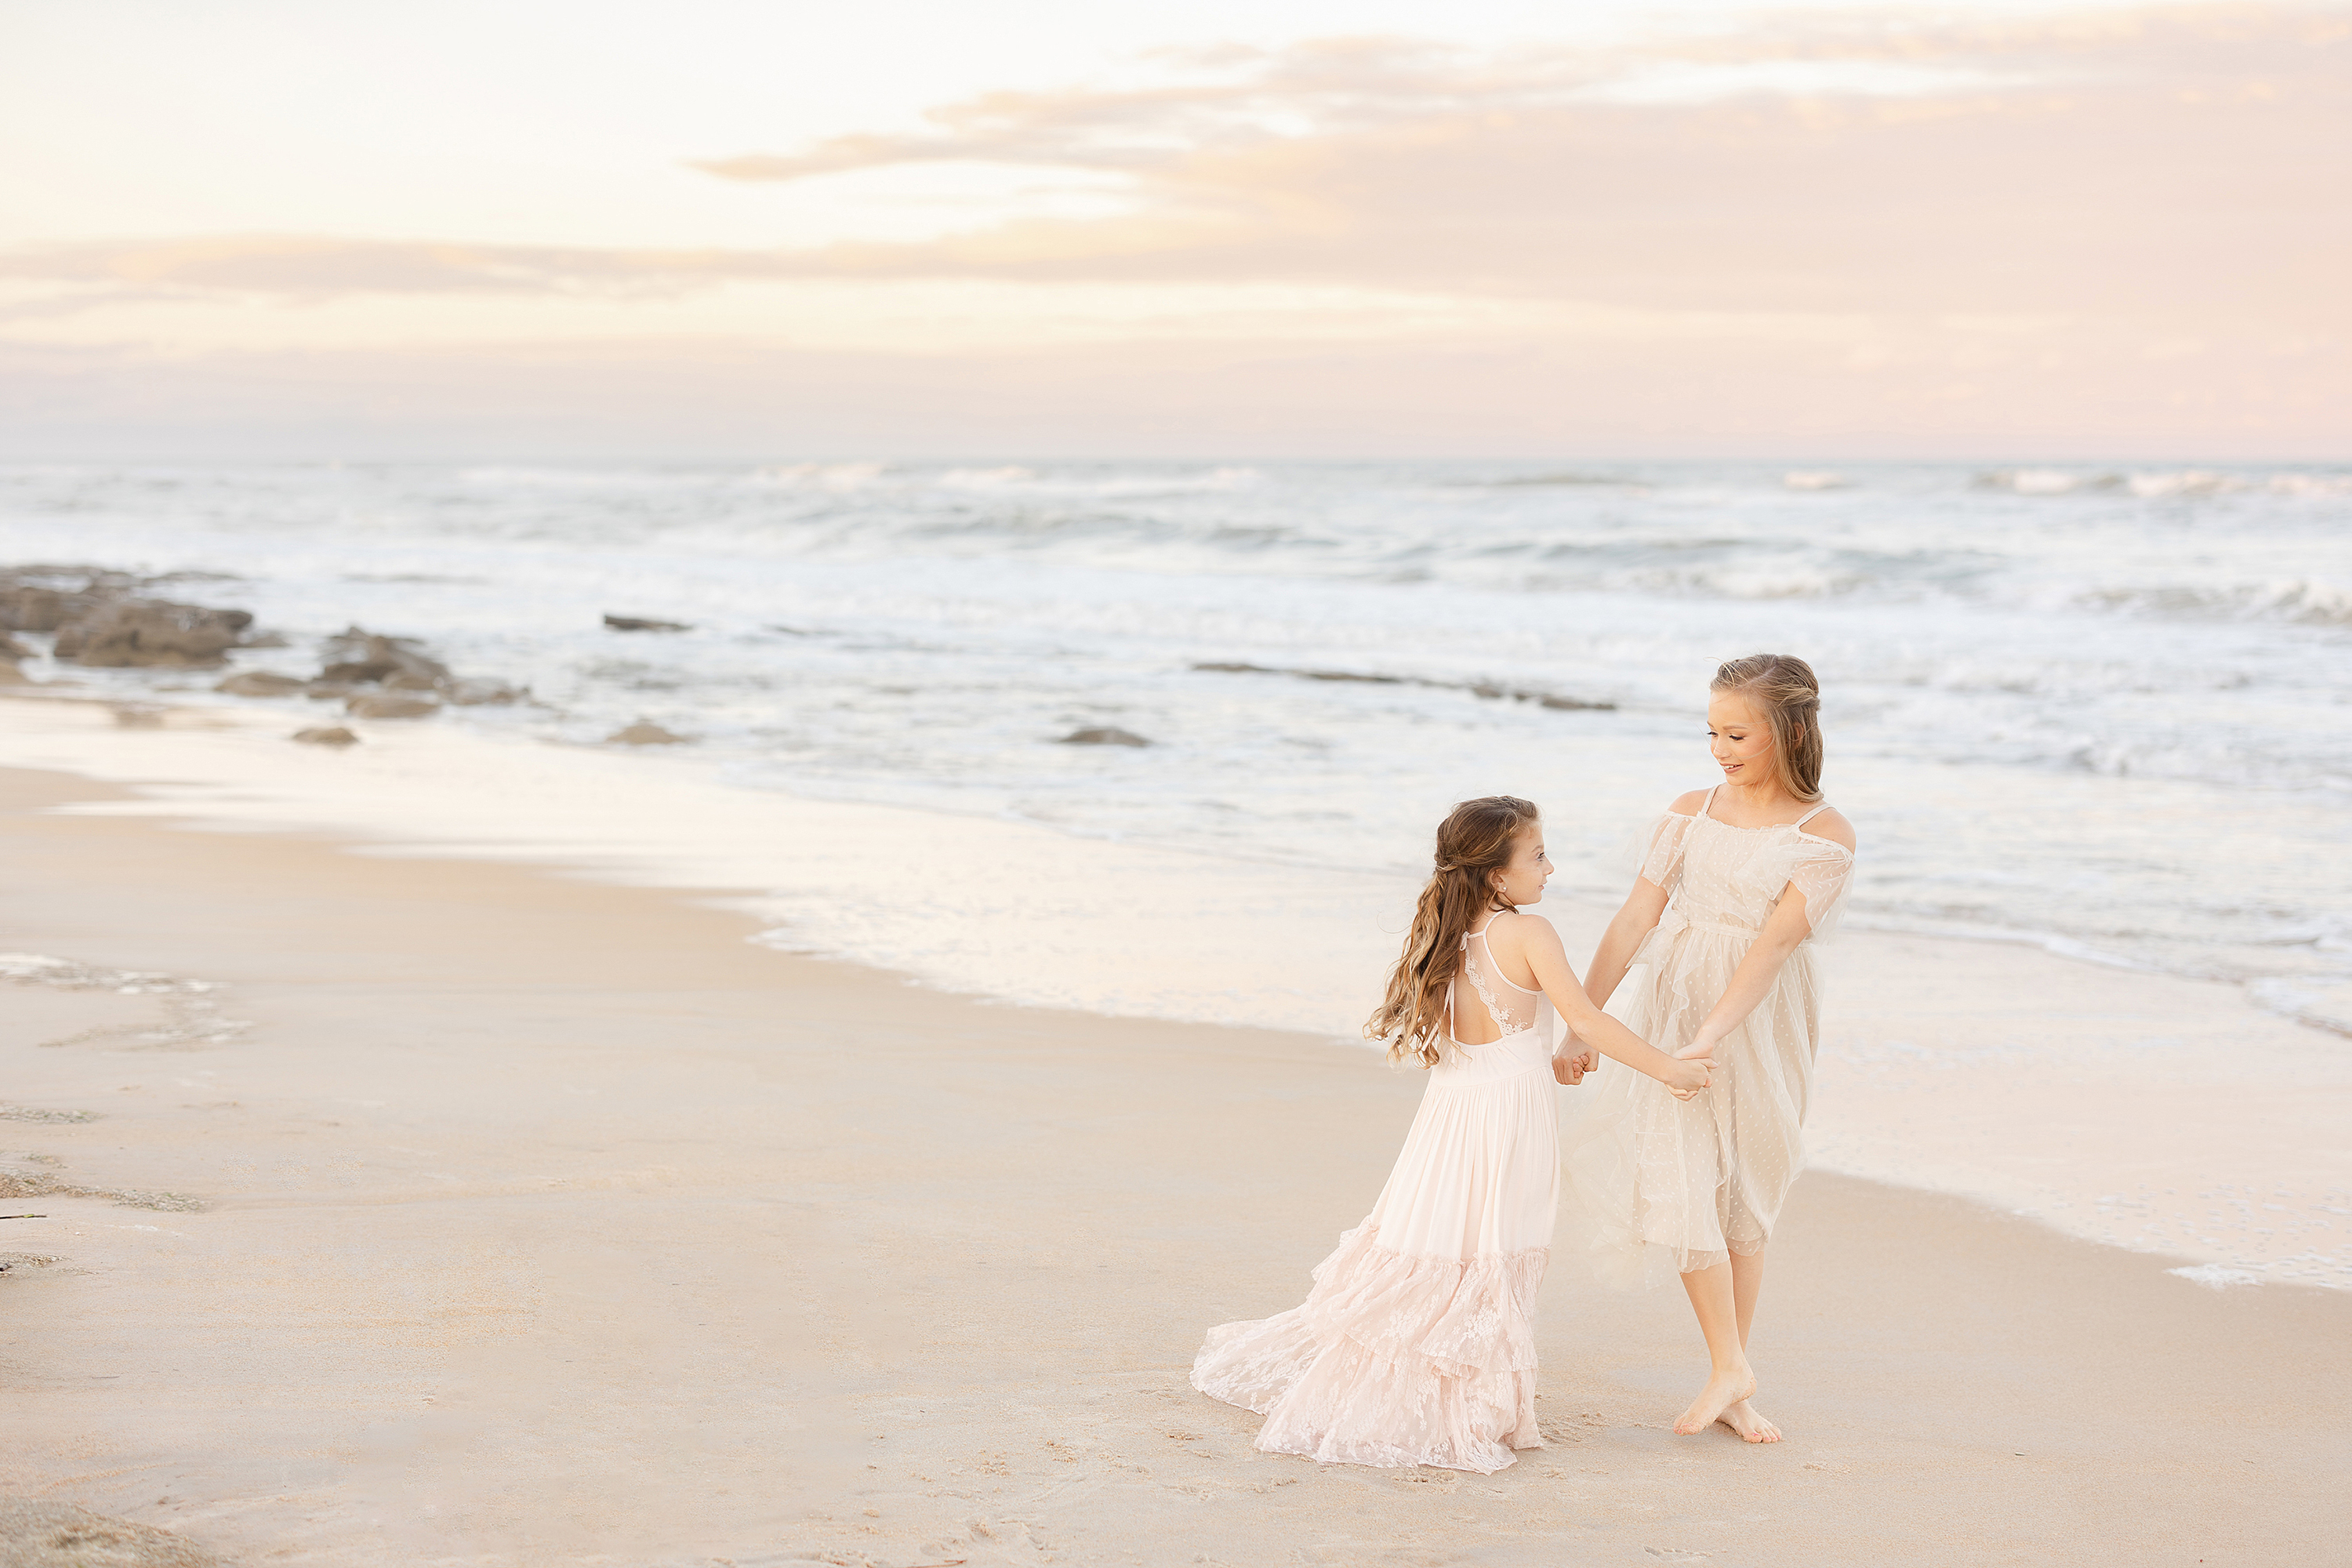 Two little girls dance together on the beach during a colorful pastel sunset.